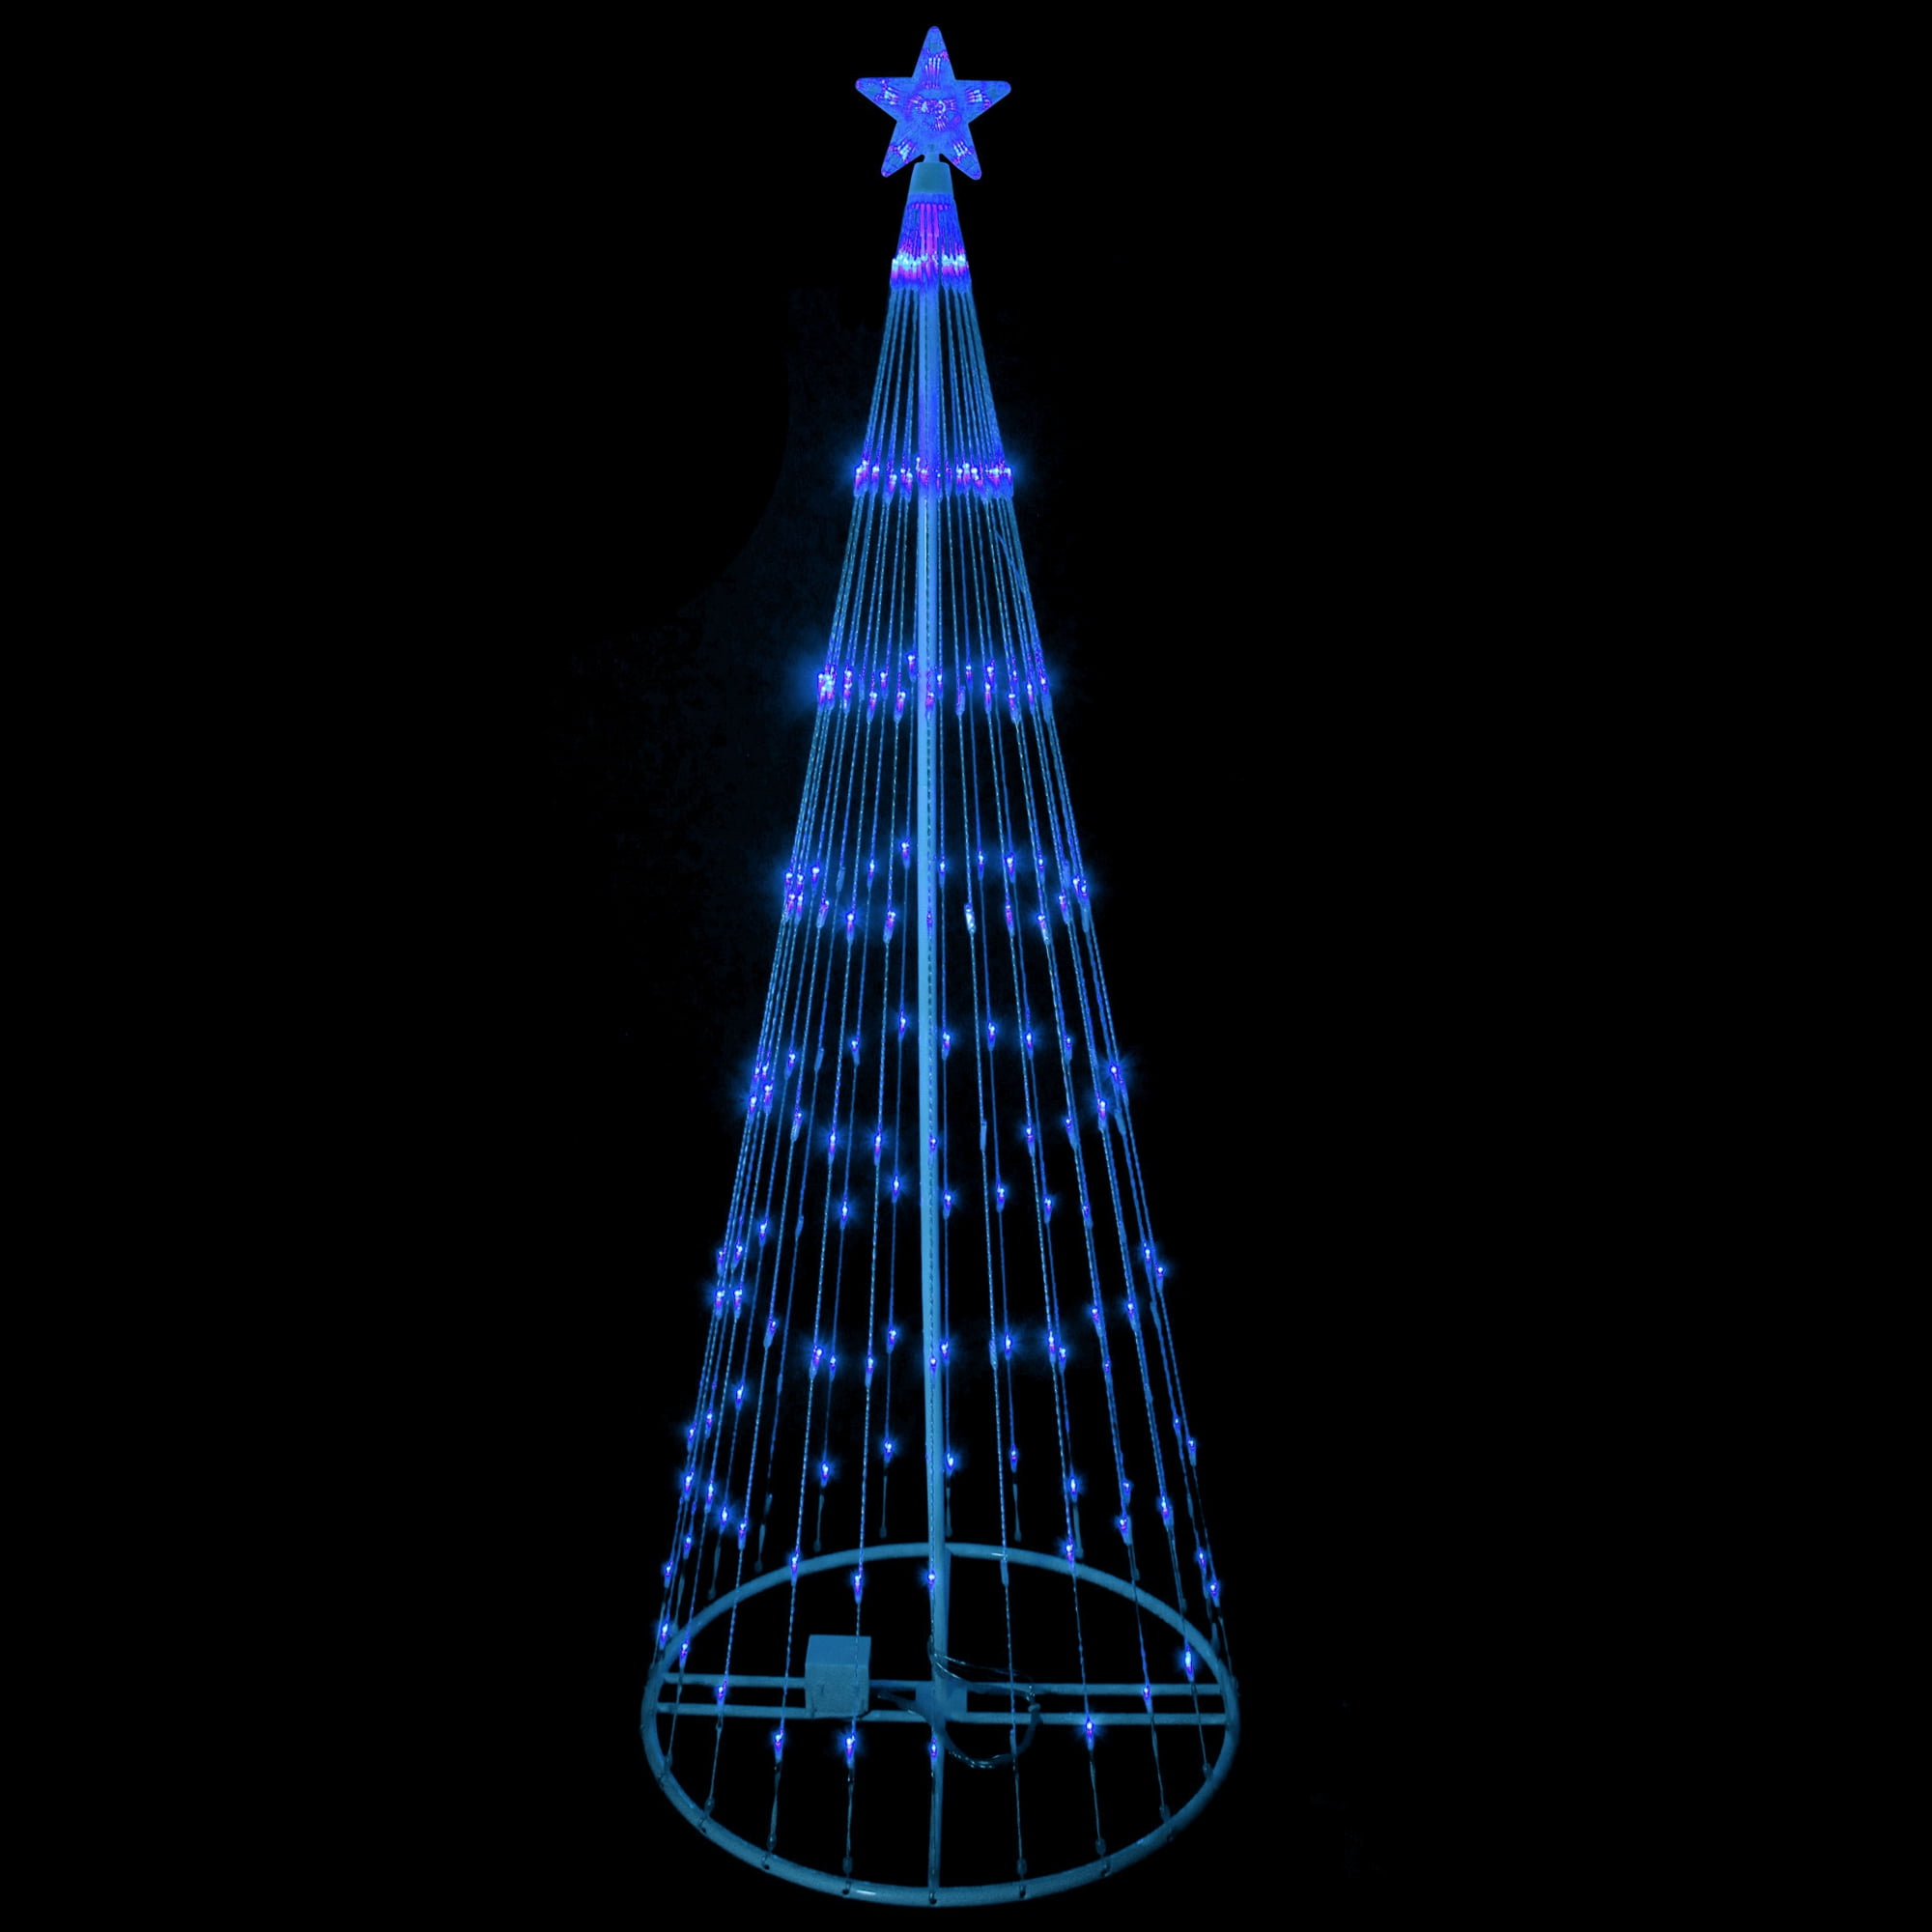 6' Blue LED Lighted Show Cone Christmas Tree Outdoor Decoration ...